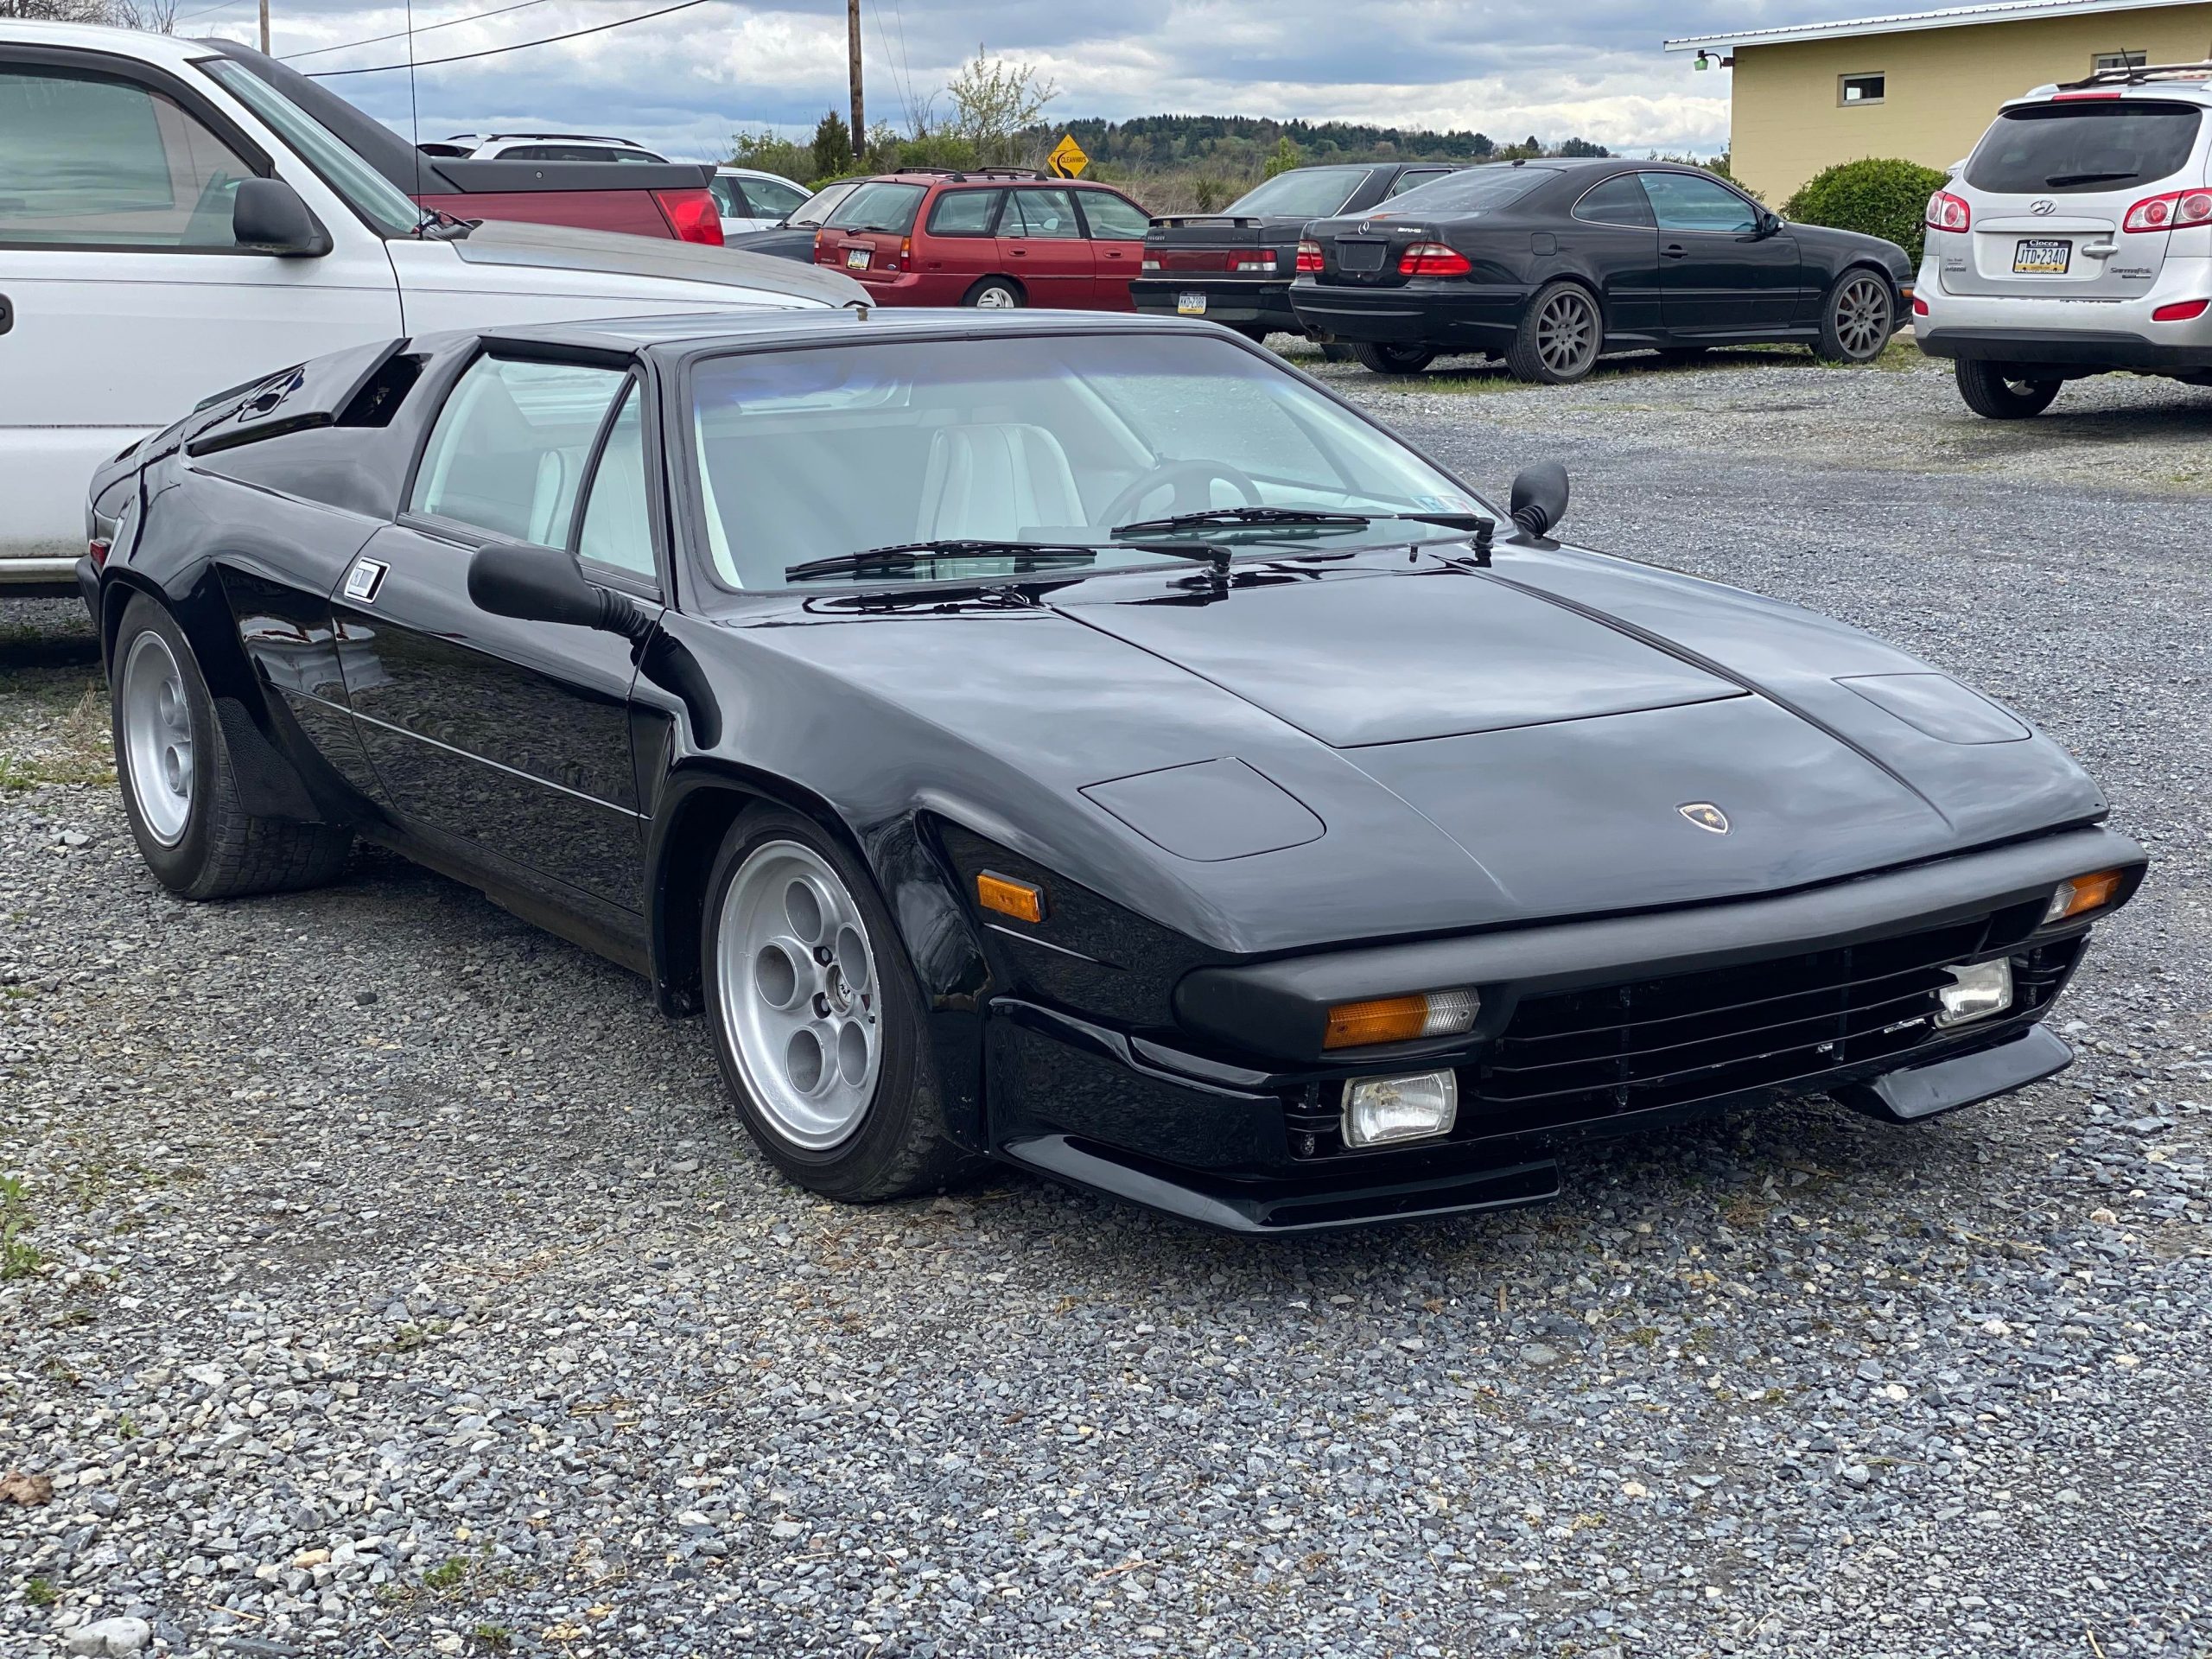 Lamborghini Jalpa (Got to detail this beauty today. Never been so satisfied.)